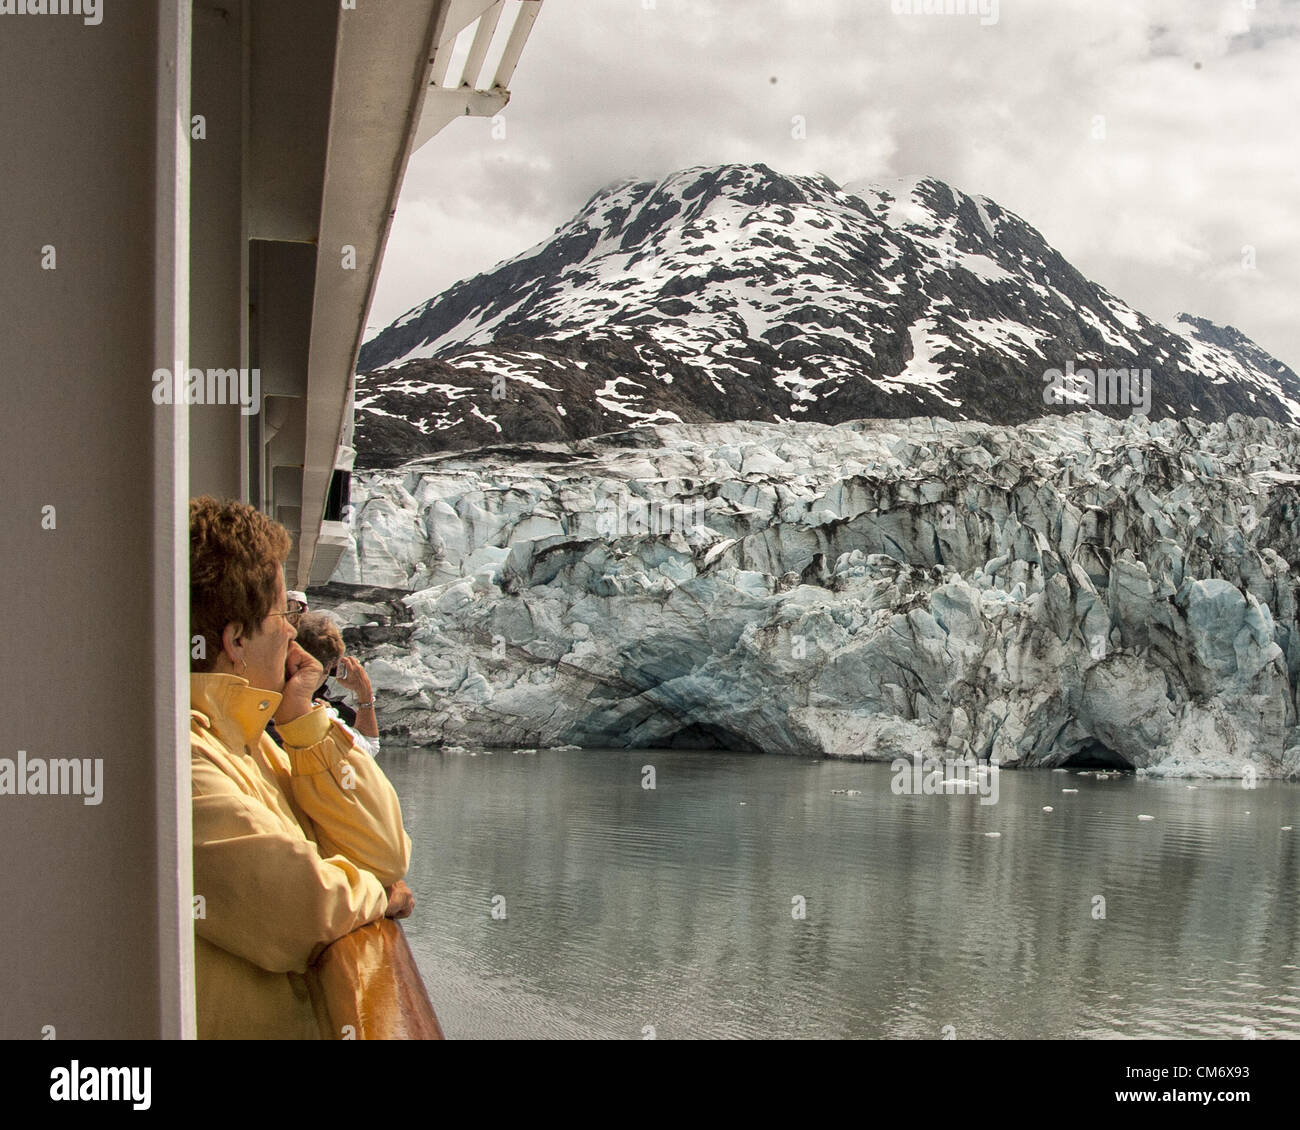 July 3, 2012 - Glacier Bay, Alaska, US - Passengers cruising in Glacier Bay view the impressive Lamplugh Glacier from their balconies on the Holland America Lines ms Zaandam. Originating in the Brady Icefield the glacier stretches over 16 miles (26Â km) and has a width of about 0.75 miles (1.21Â km) at the water face and rises to heights of 150â€“160 feet (46â€“49 m). Glacier Bay covers 3.3 million acres (1.3 million hectares) of rugged mountains, dynamic glaciers, temperate rainforest, wild coastlines, deep sheltered fjords and wildlife. A highlight of the Alaskan Inside Passage and part of a Stock Photo